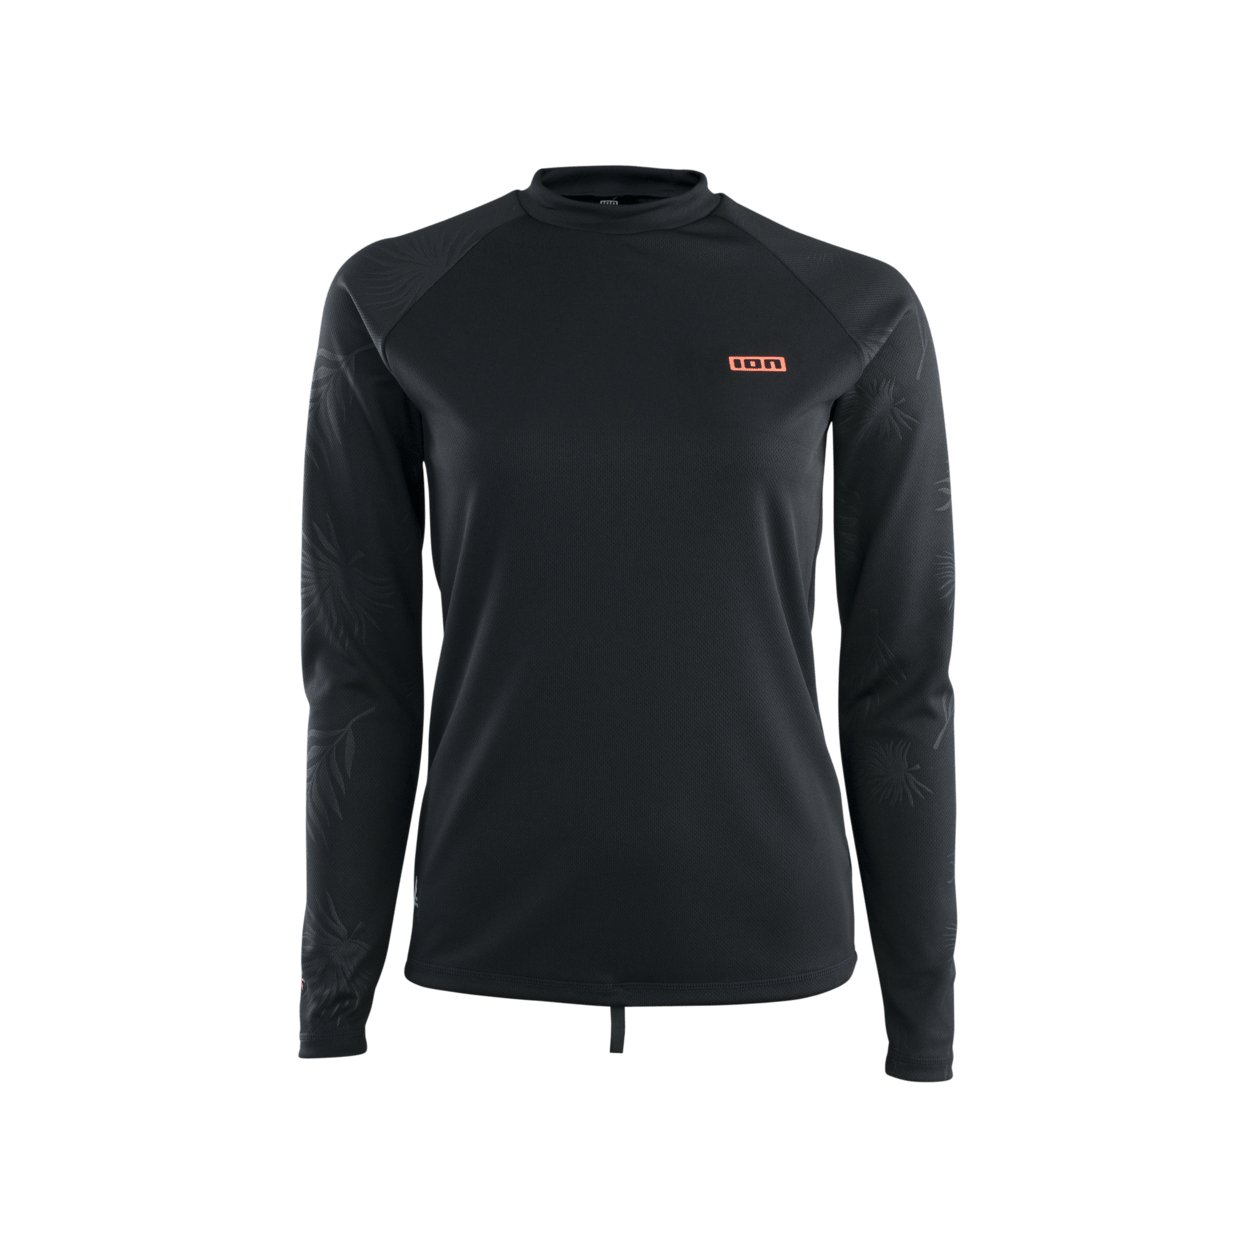 ION Wetshirt LS women 2023 - Worthing Watersports - 9010583117720 - Tops - ION Water